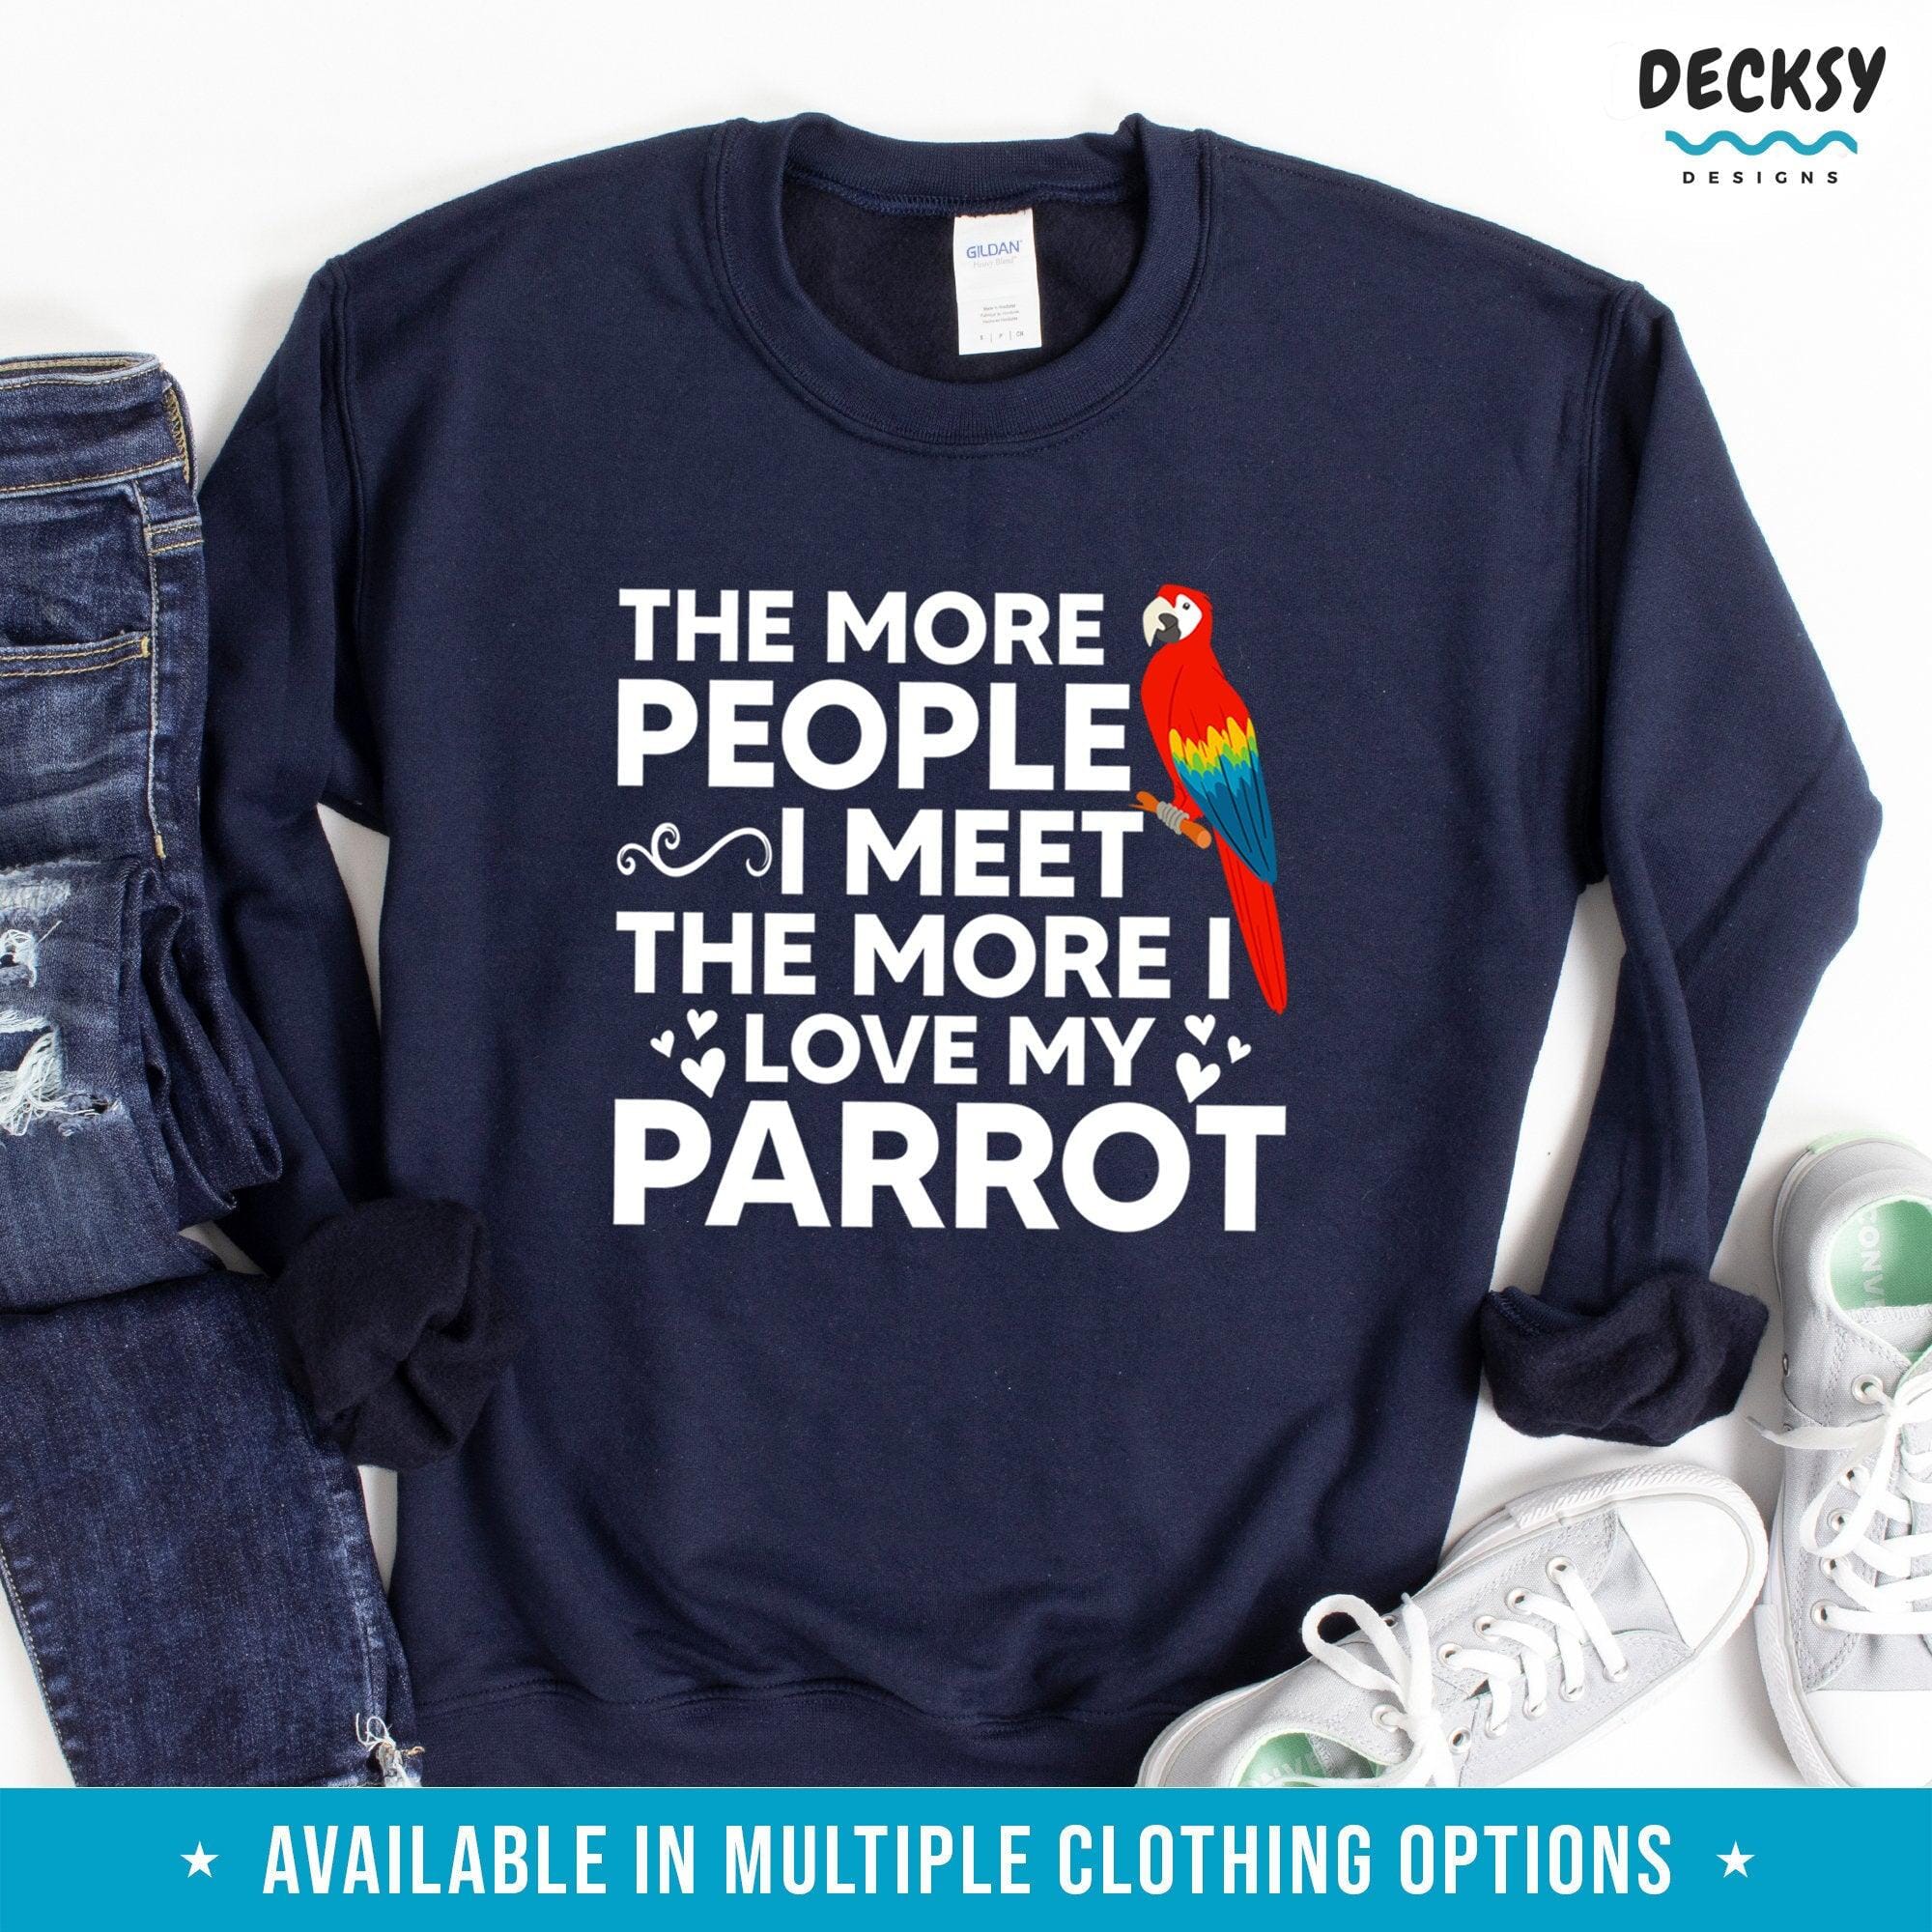 Macaw Parrot Shirt, Bird Lover Gift-Clothing:Gender-Neutral Adult Clothing:Tops & Tees:T-shirts:Graphic Tees-DecksyDesigns